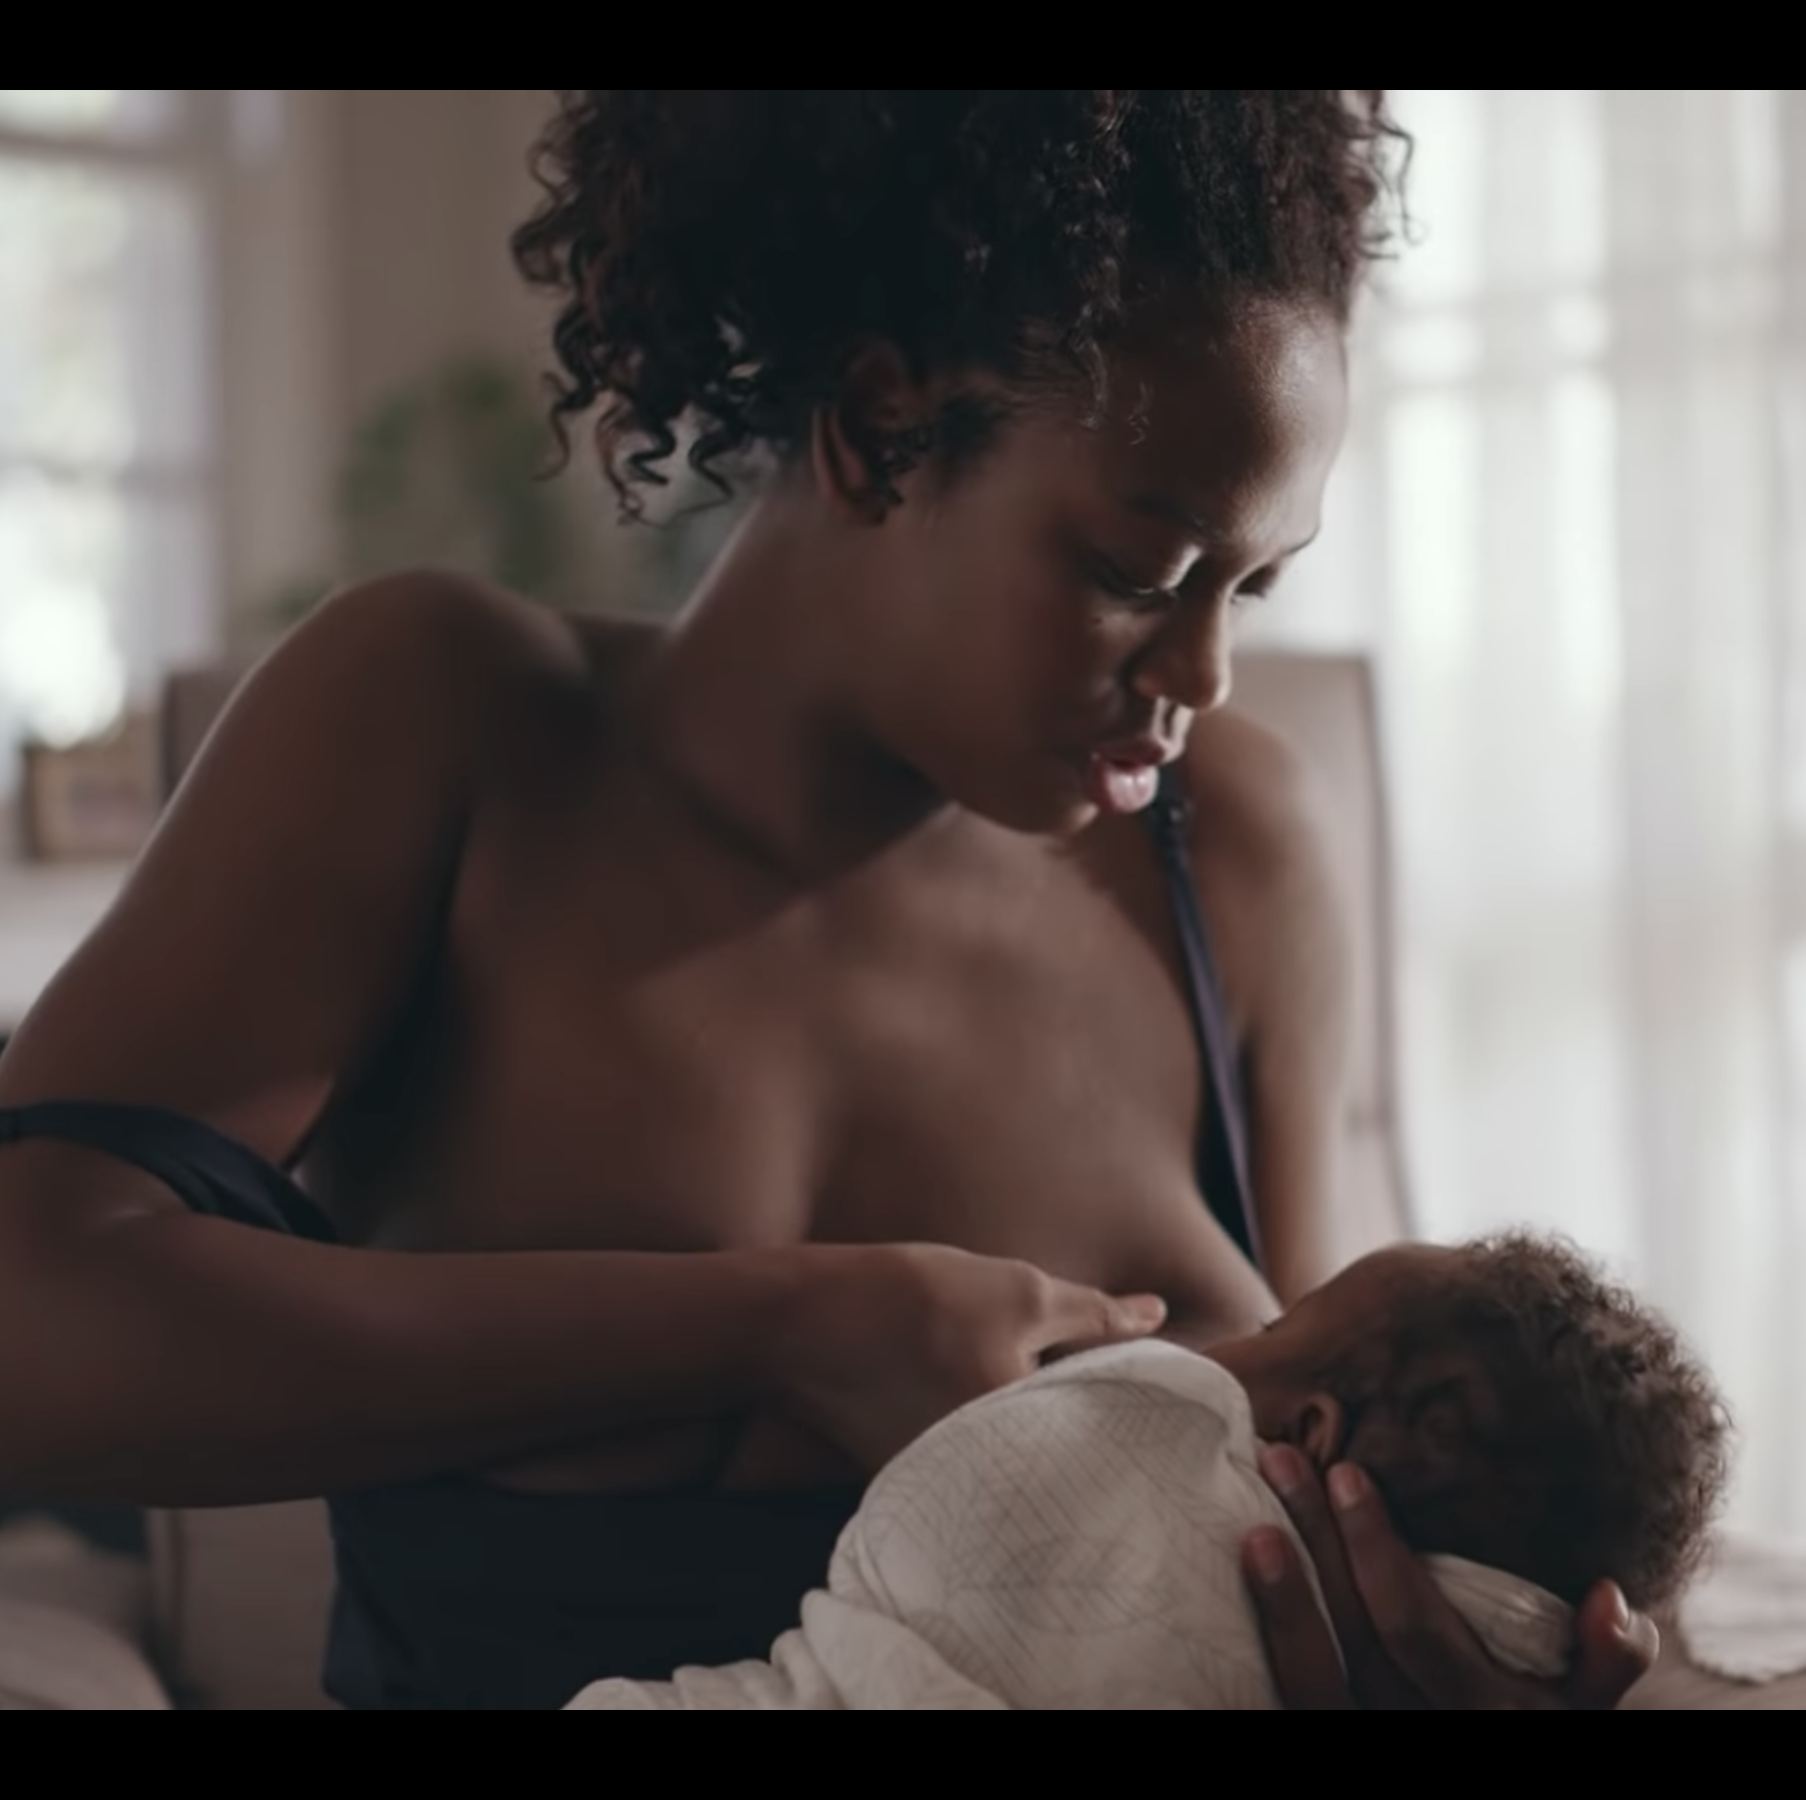 Frida Mom's new breast care products are a breastfeeding mama's BFF